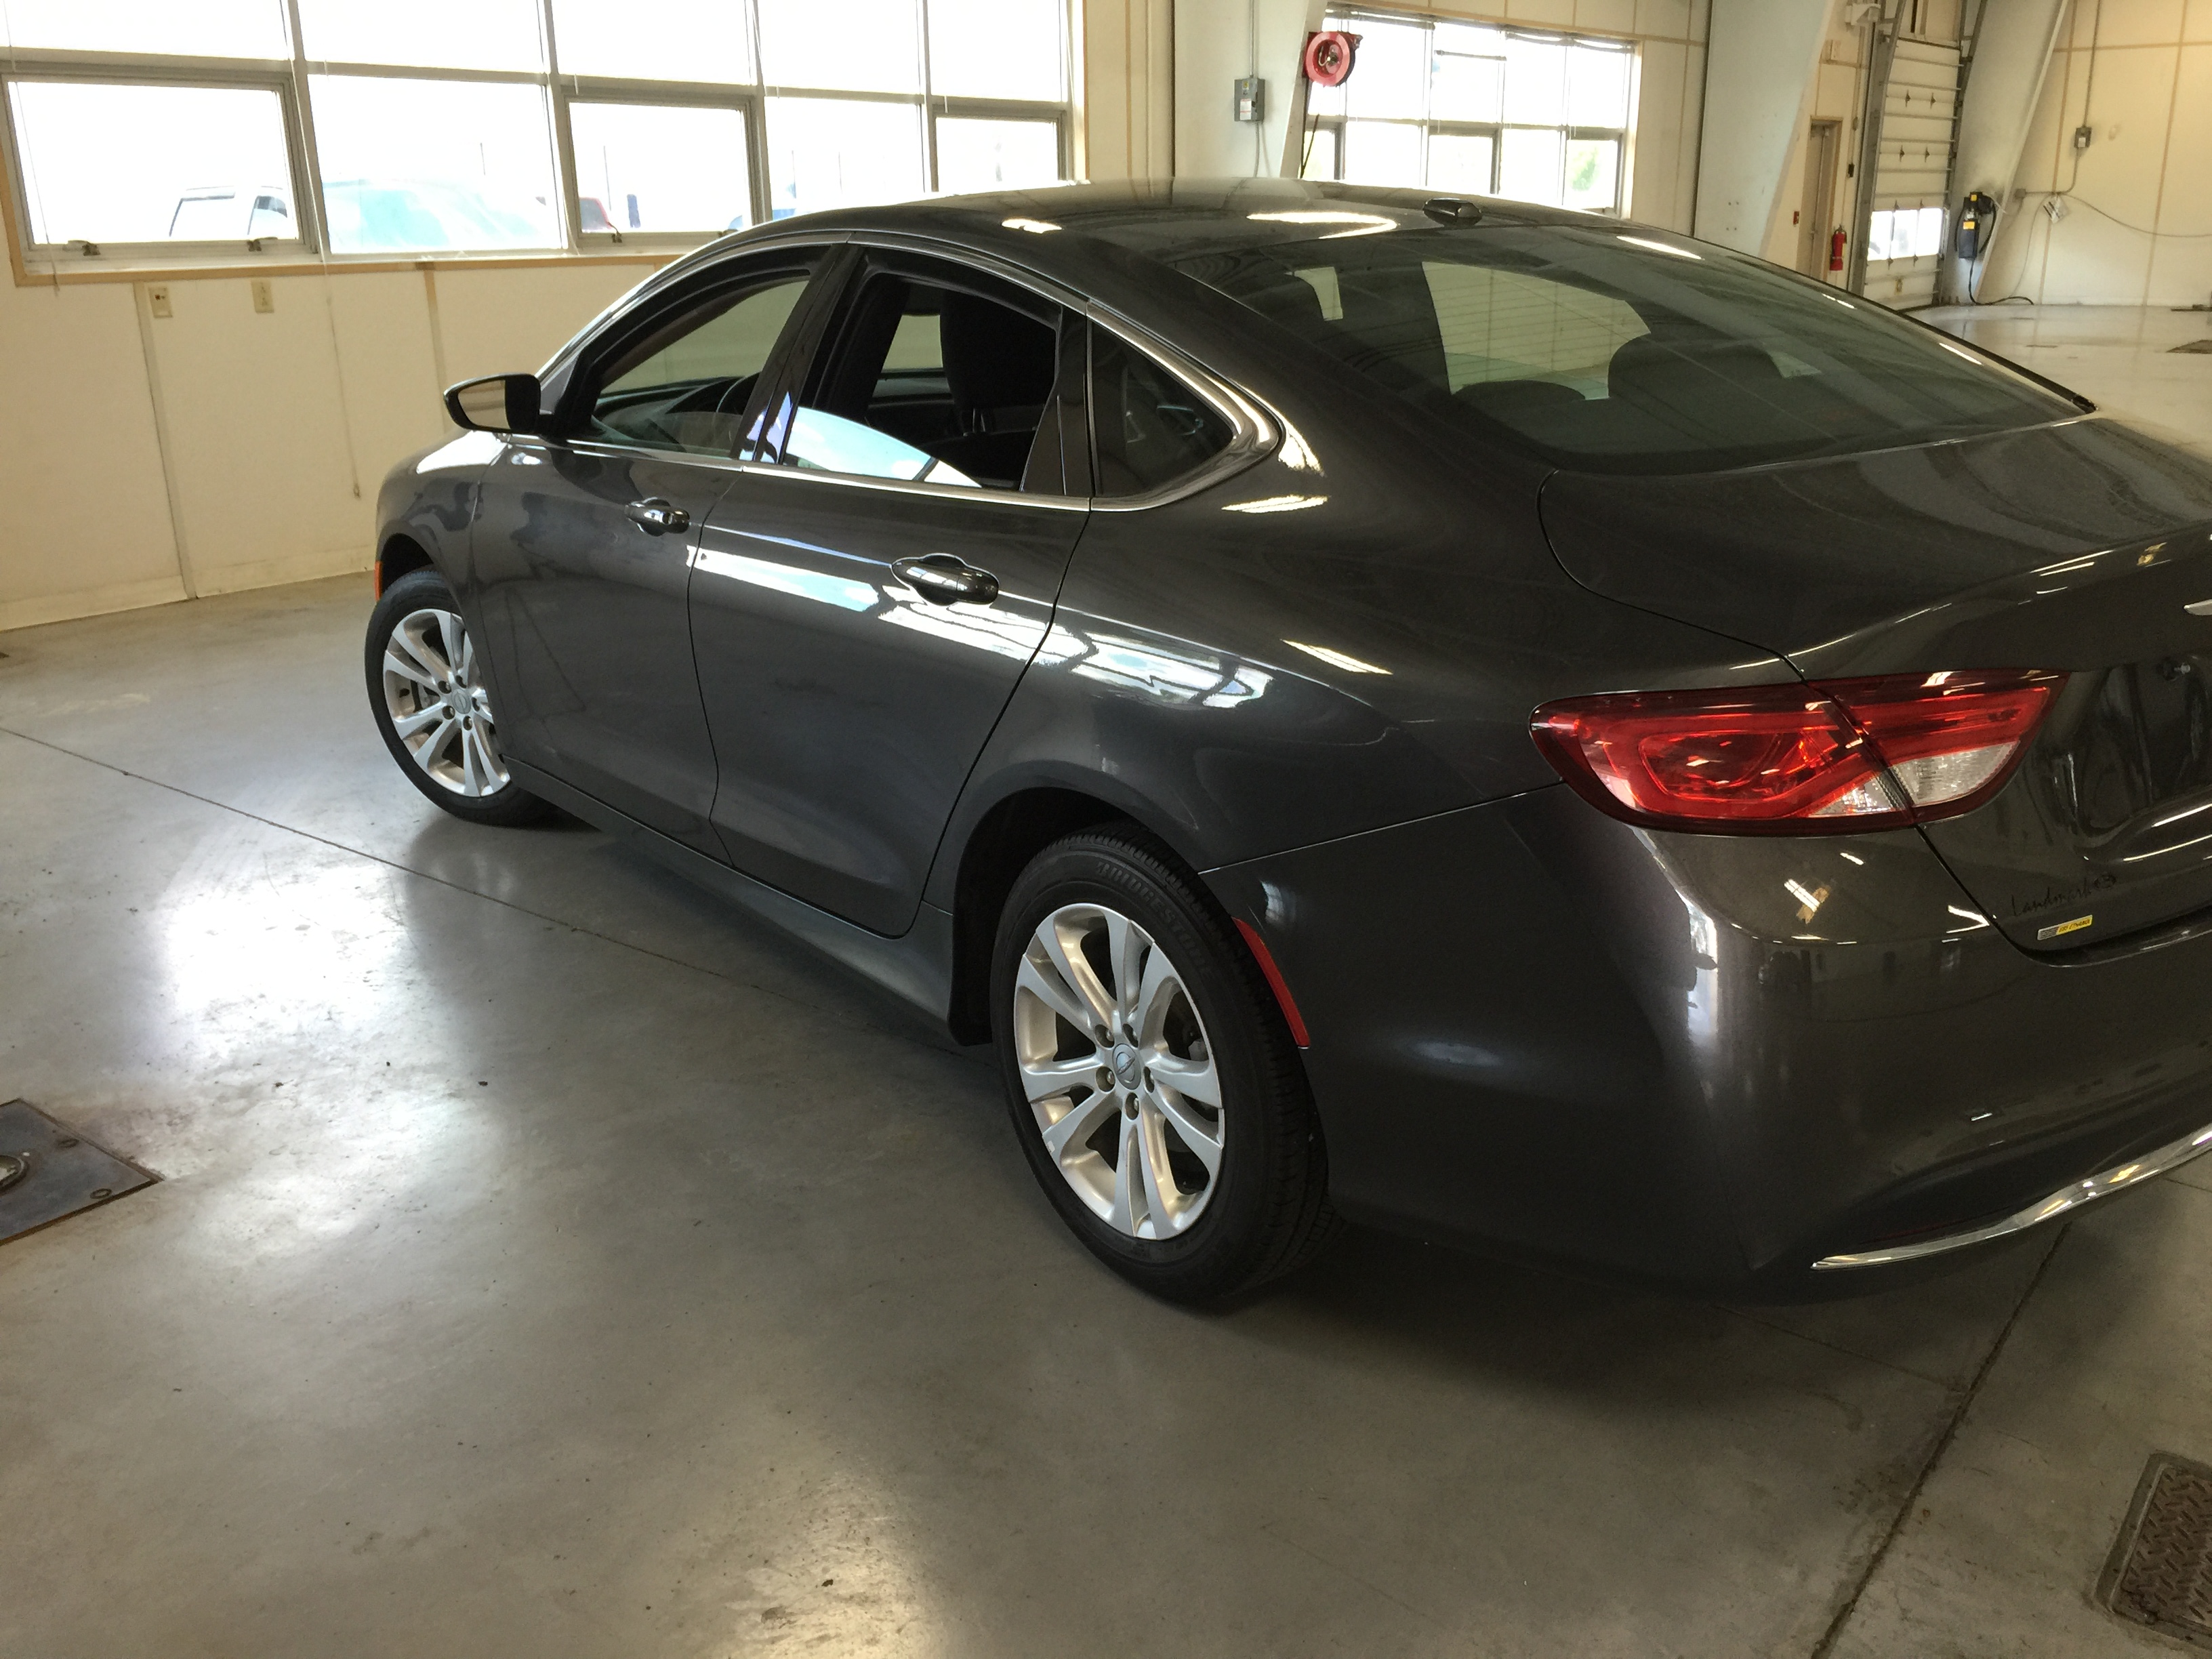 2015 Chrysler 200 Gray Metallic | Dent Removal On Passenger Side Rear Door. Work was done by Michael Bocek from 217dent.com. Go to http://217dent.com an estimate, or for more information about paintless dent removal